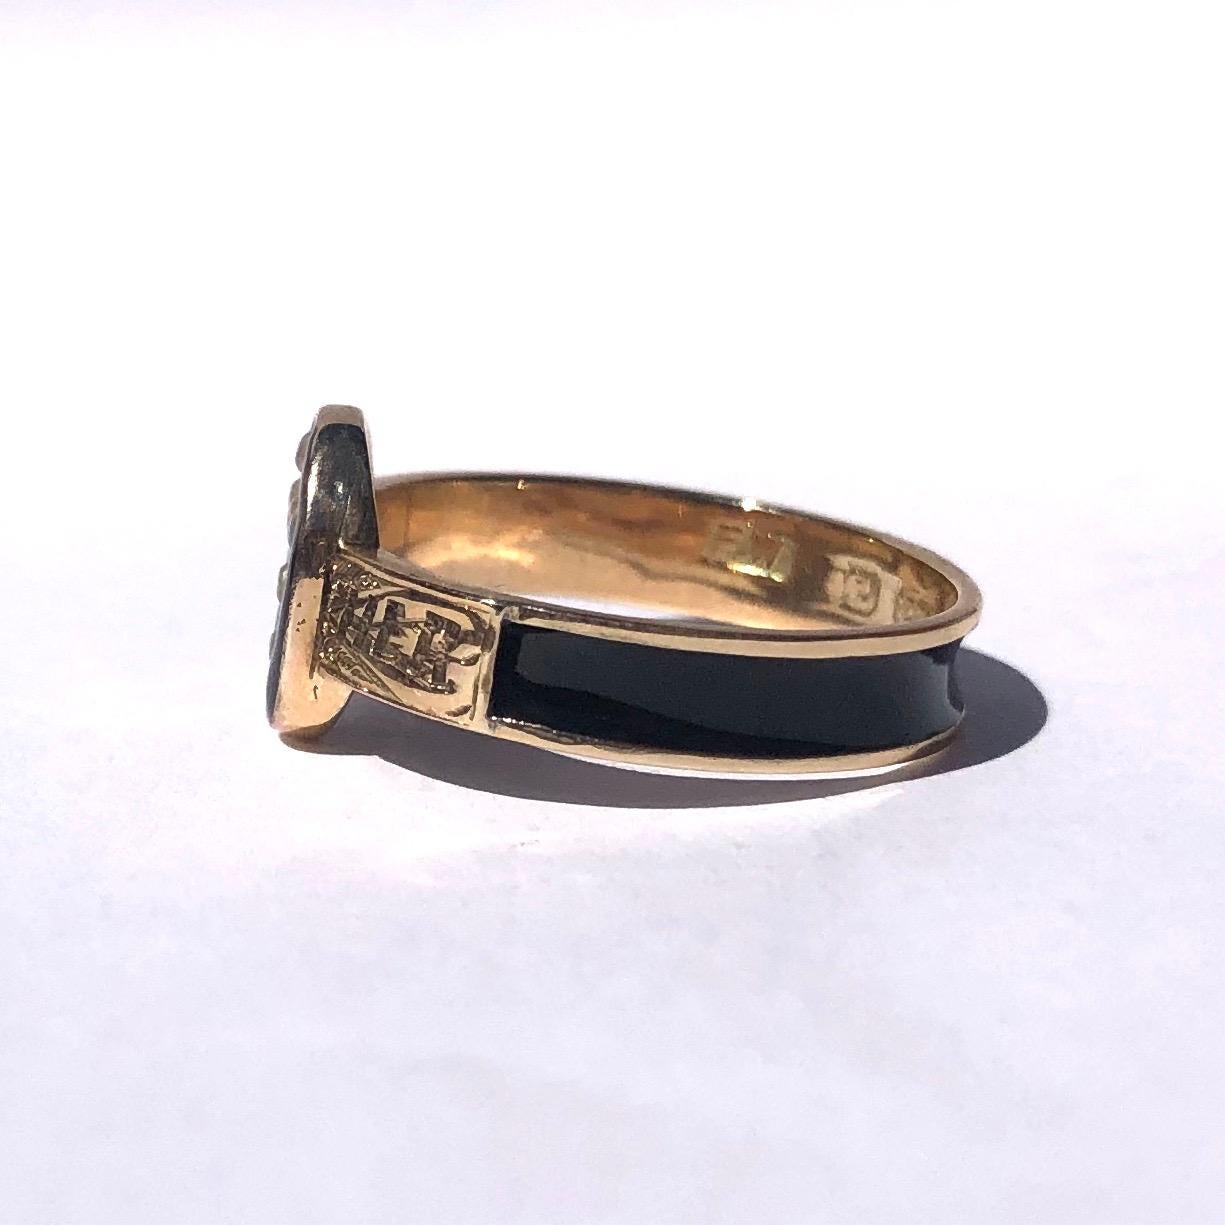 The main feature of this mourning band is a panel holding a pearl cross and black enamel which surround sit. The shoulders are finely engraved and the rest of the band has black enamel detail. Made in Birmingham, England. 

Ring Size: N 1/2 or